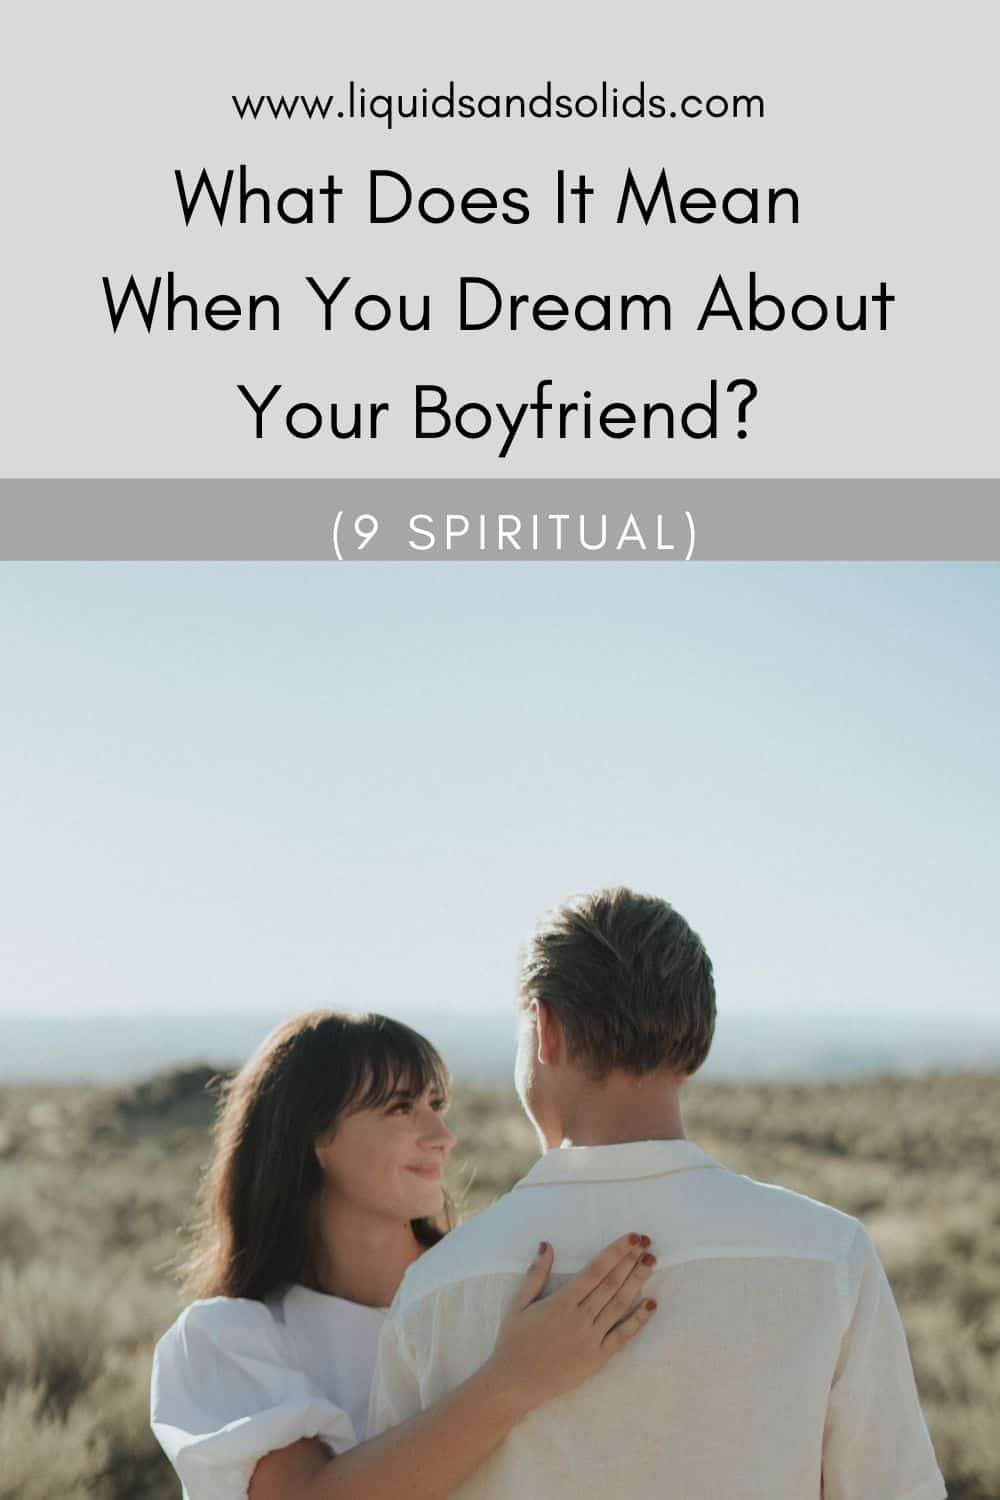 What Does It Mean When You Dream About Your Boyfriend? (9 Spiritual)